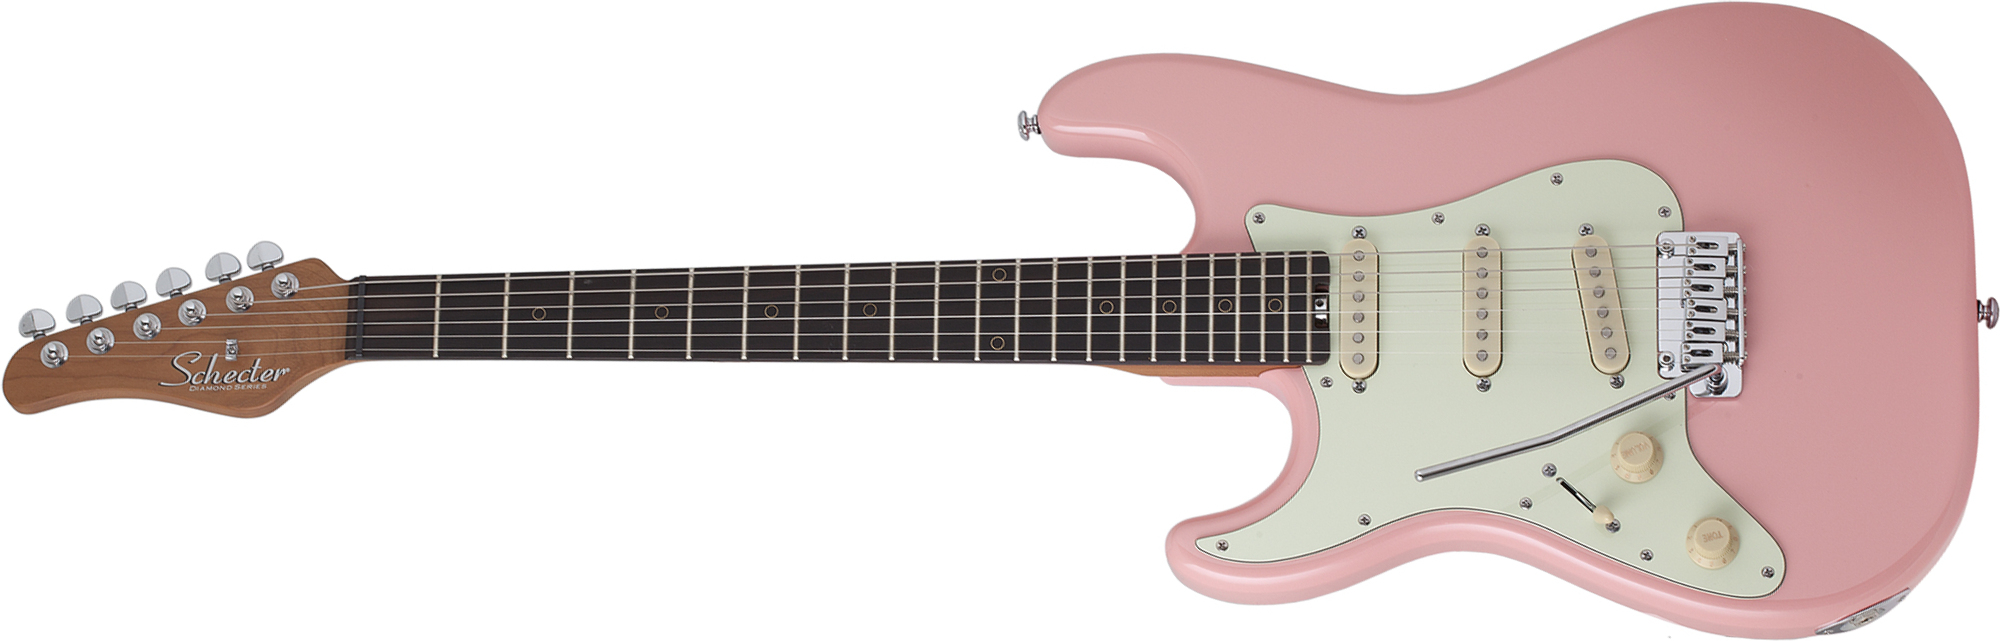 Schecter Nick Johnston Traditional Gaucher Signature 3s Trem Eb - Atomic Coral - Left-handed electric guitar - Main picture